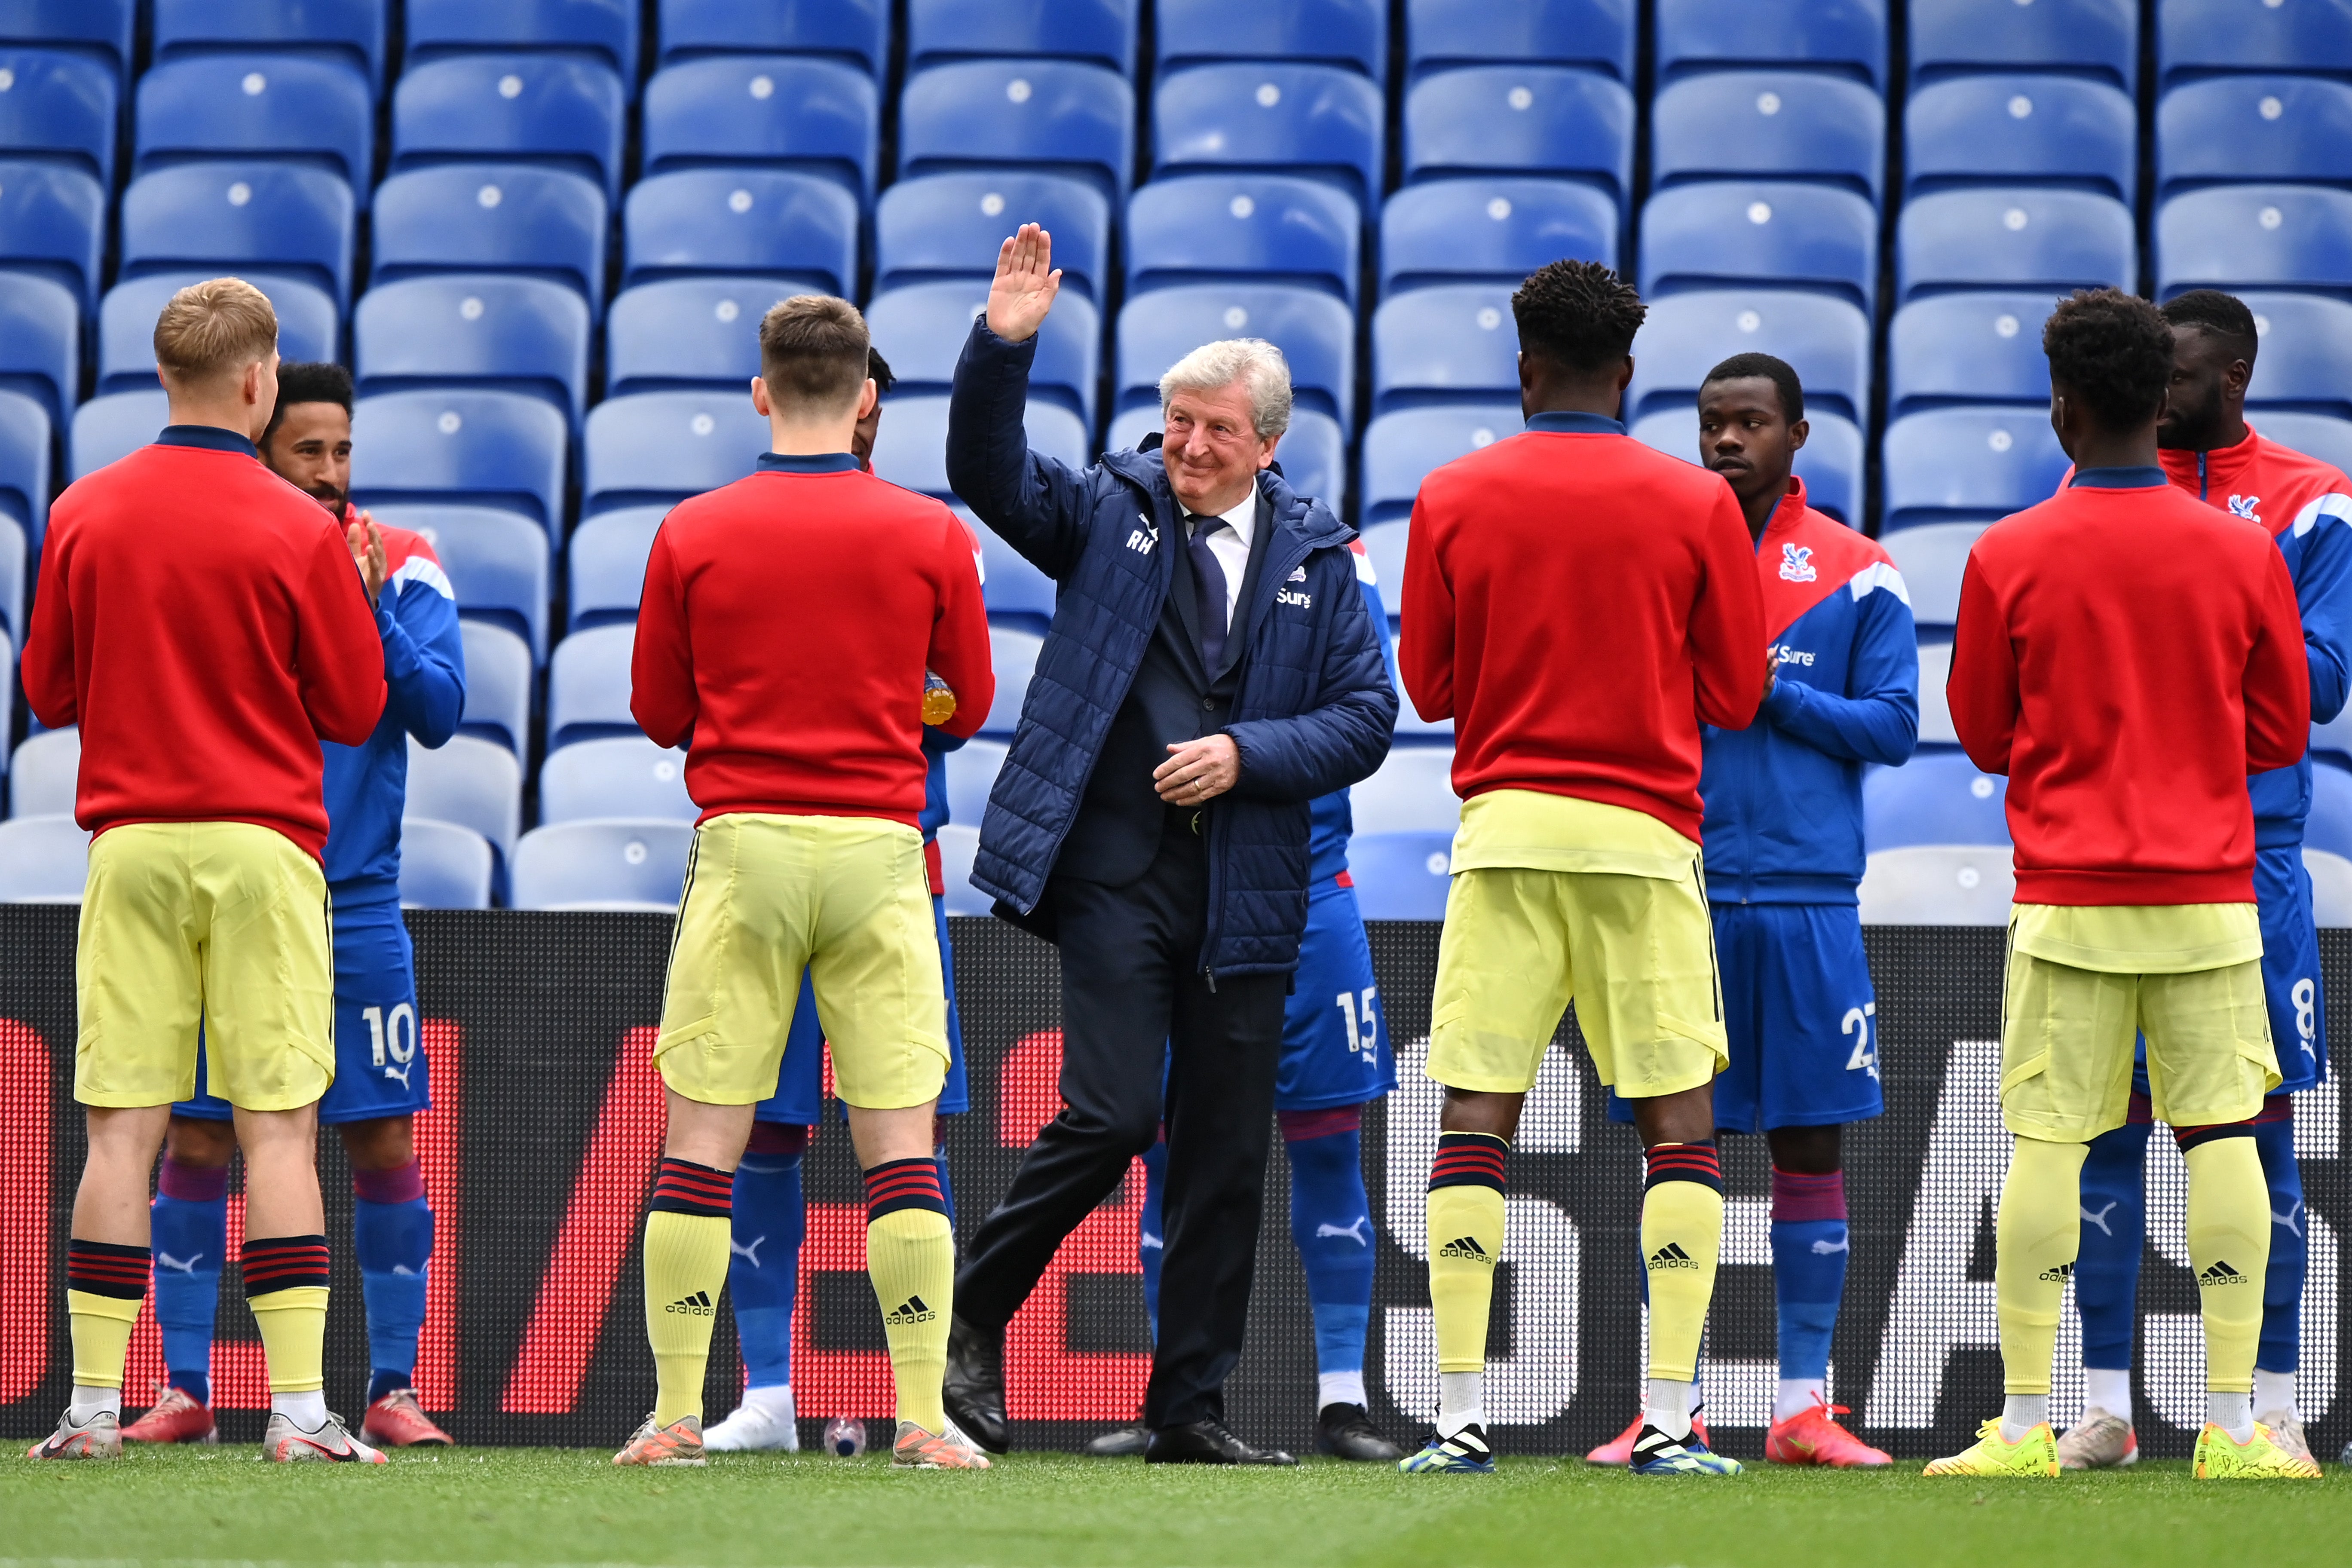 Roy Hodgson received a guard of honour on his final home match as Crystal Palace manager